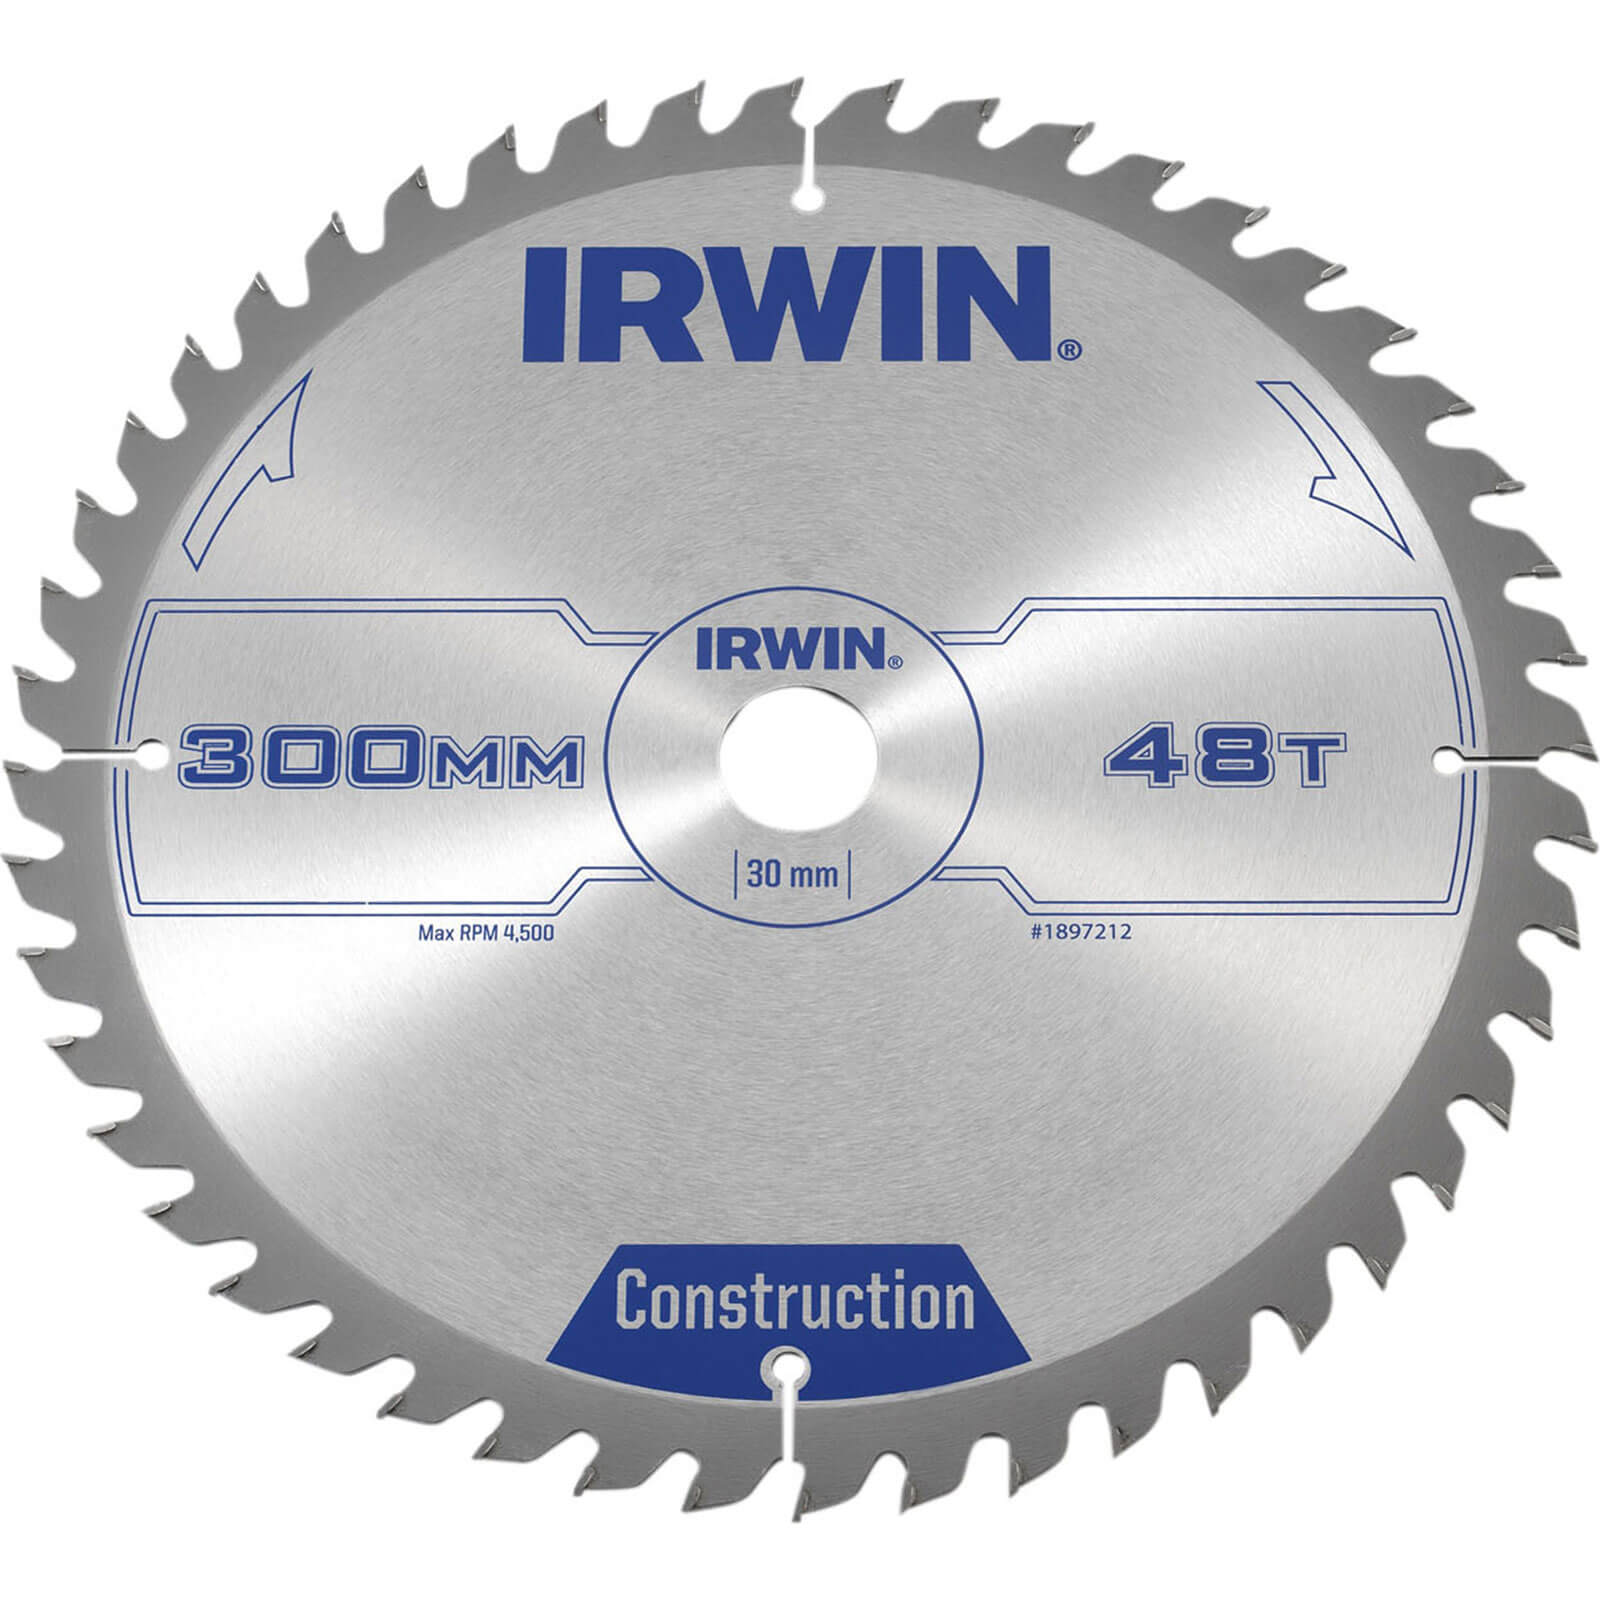 Photo of Irwin Atb Construction Circular Saw Blade 300mm 48t 30mm